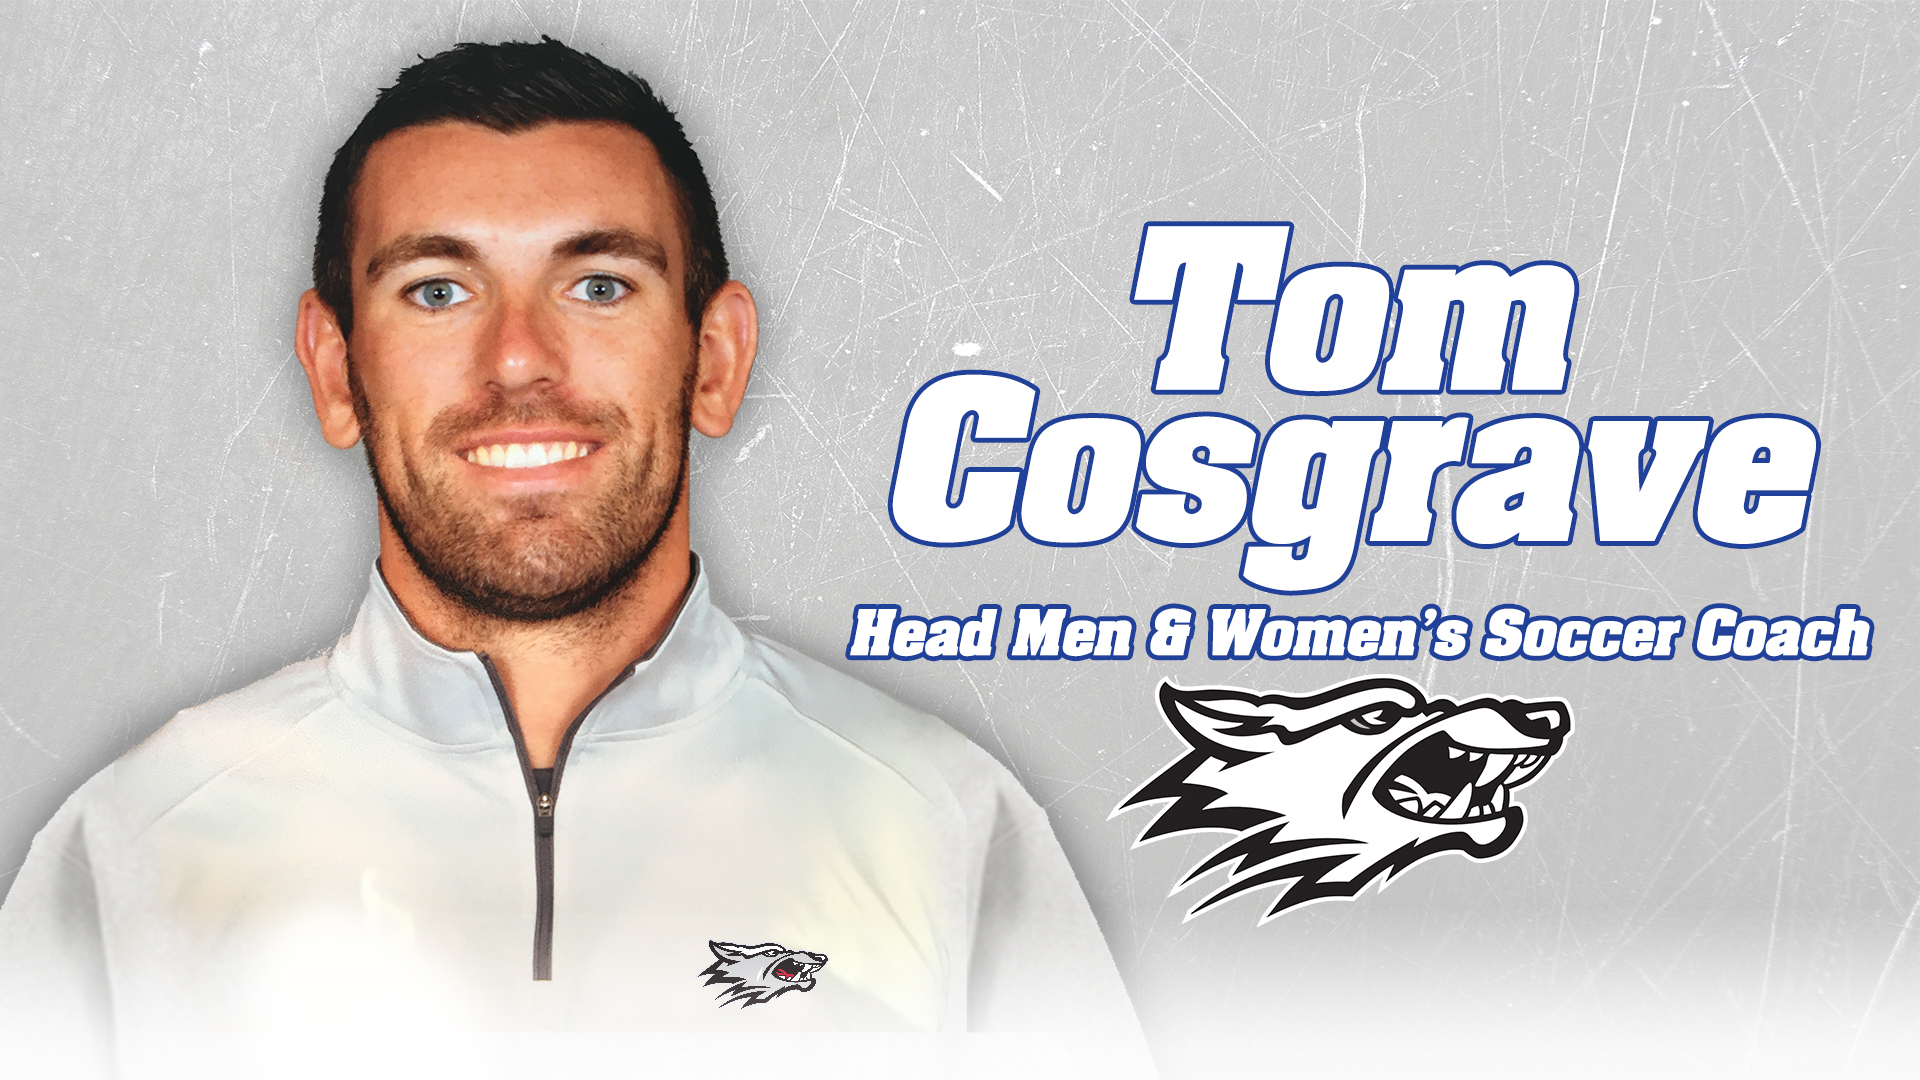 Cosgrave named Co-Lin head men and women's soccer coach